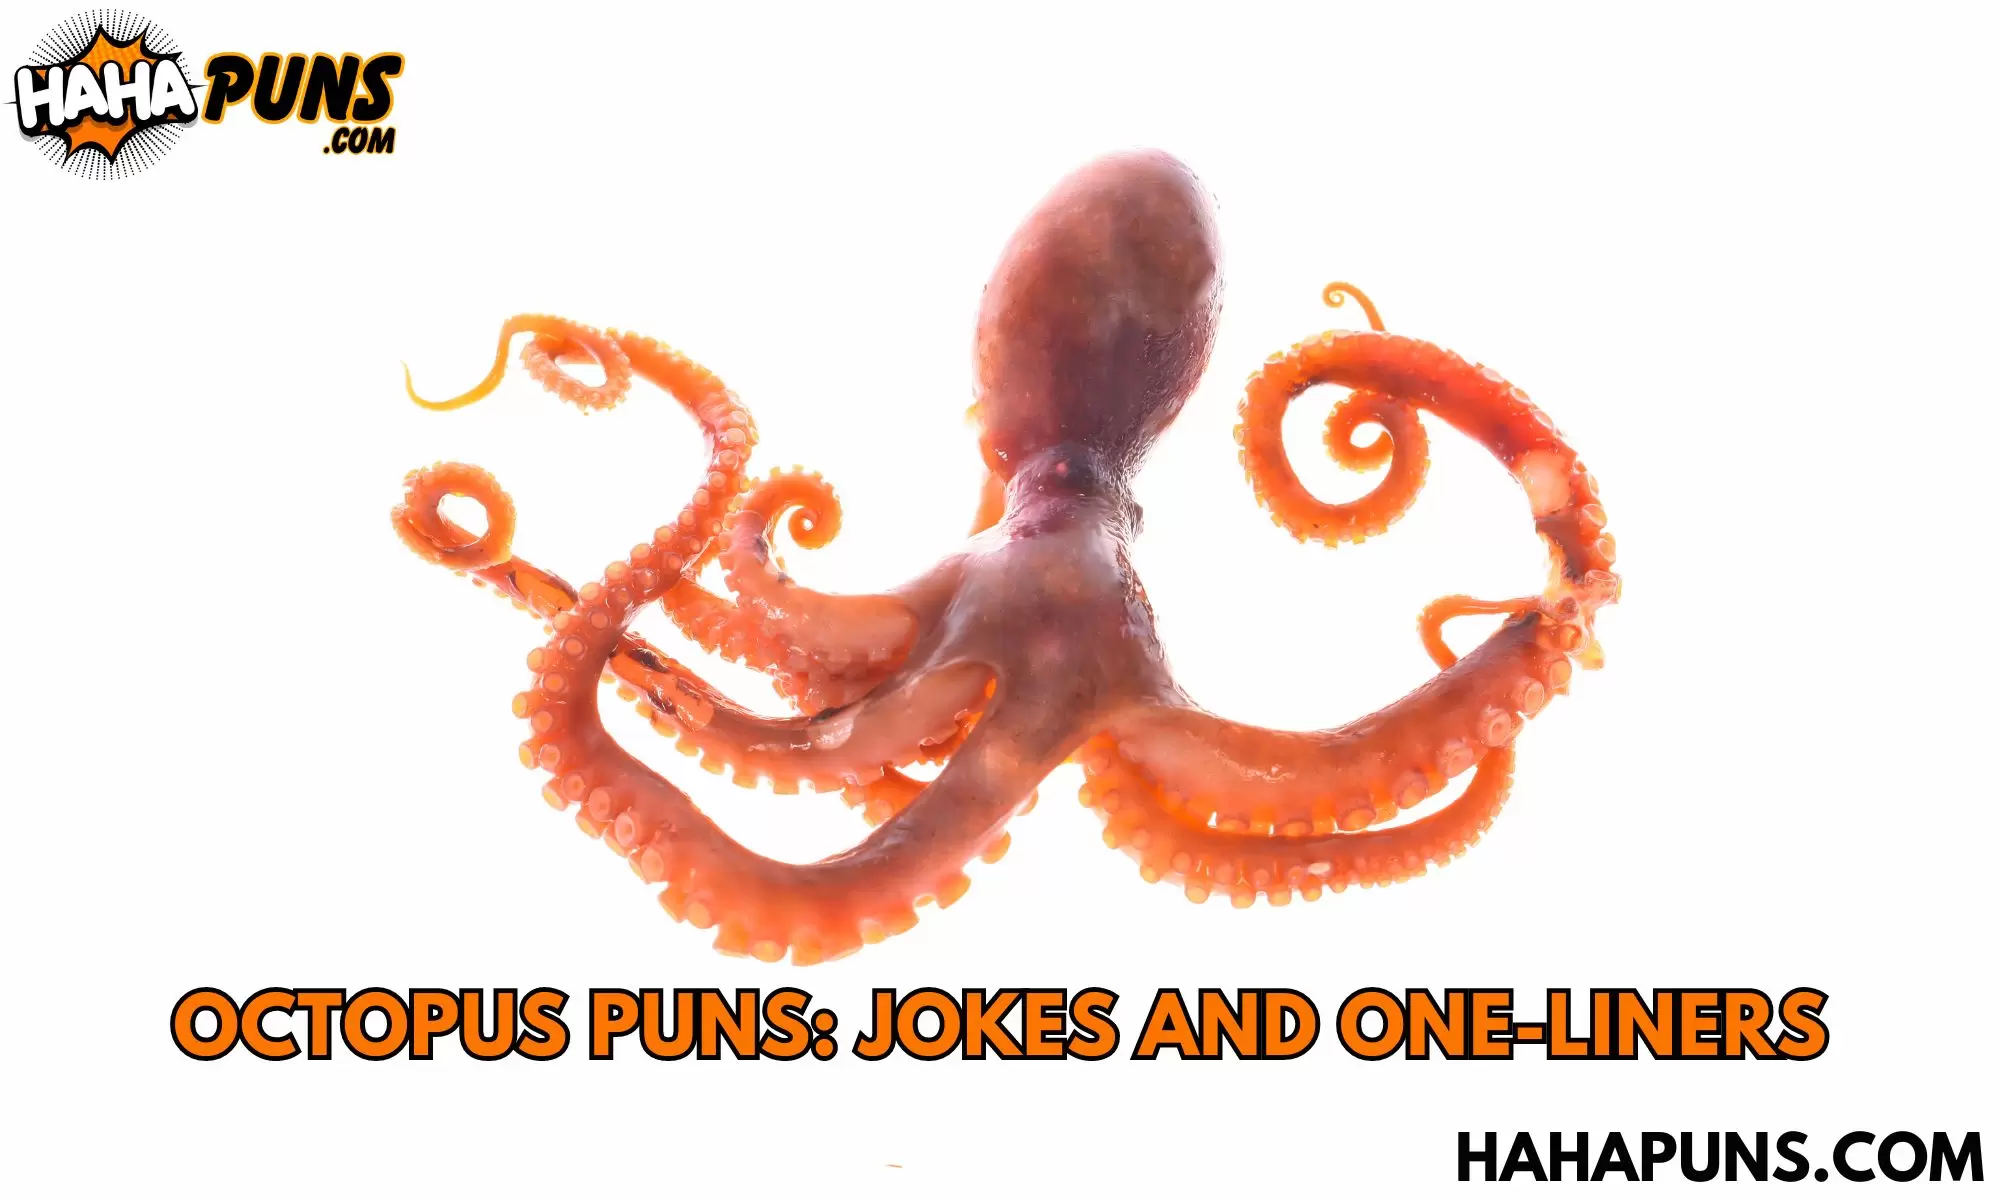 Octopus Puns: Jokes And One-Liners